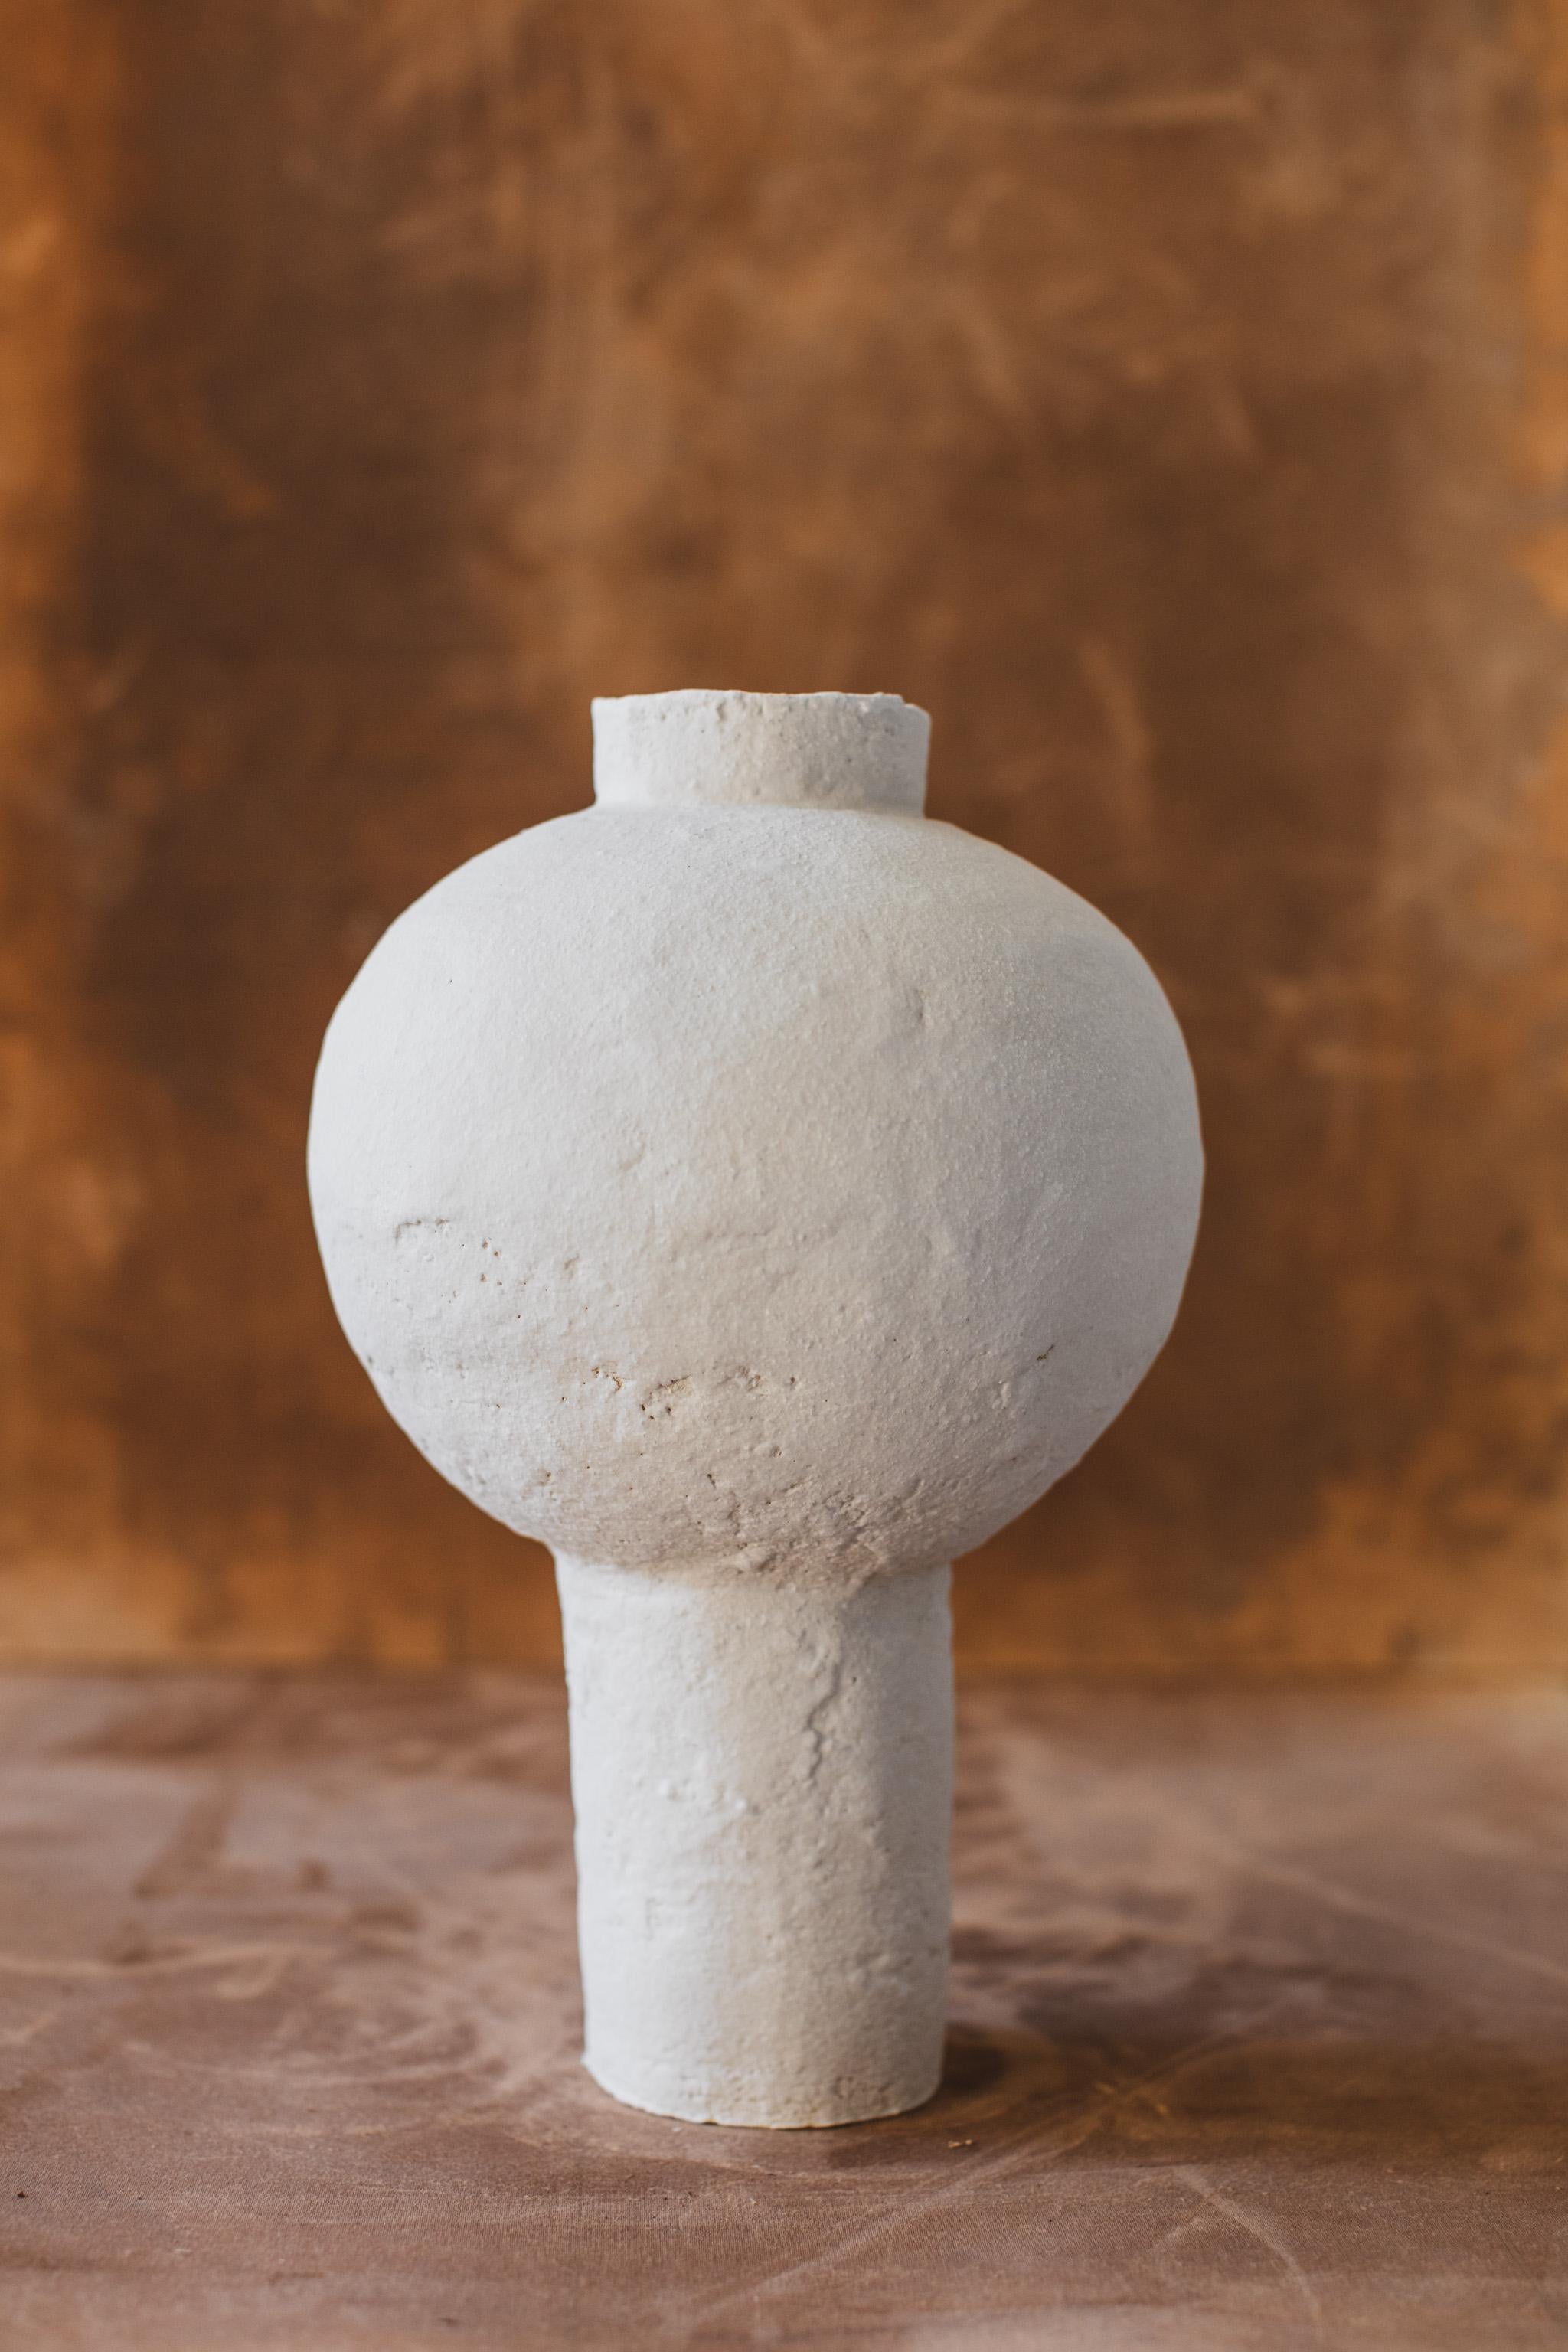 Mugly NYC is a Brooklyn based ceramic studio specializing in richly textured sculptural clay and porcelain that evoke the poetics of the handmade.

This Moon Jar was handmade in 2022 with highly textured white sculpture clay and porcelain slip,